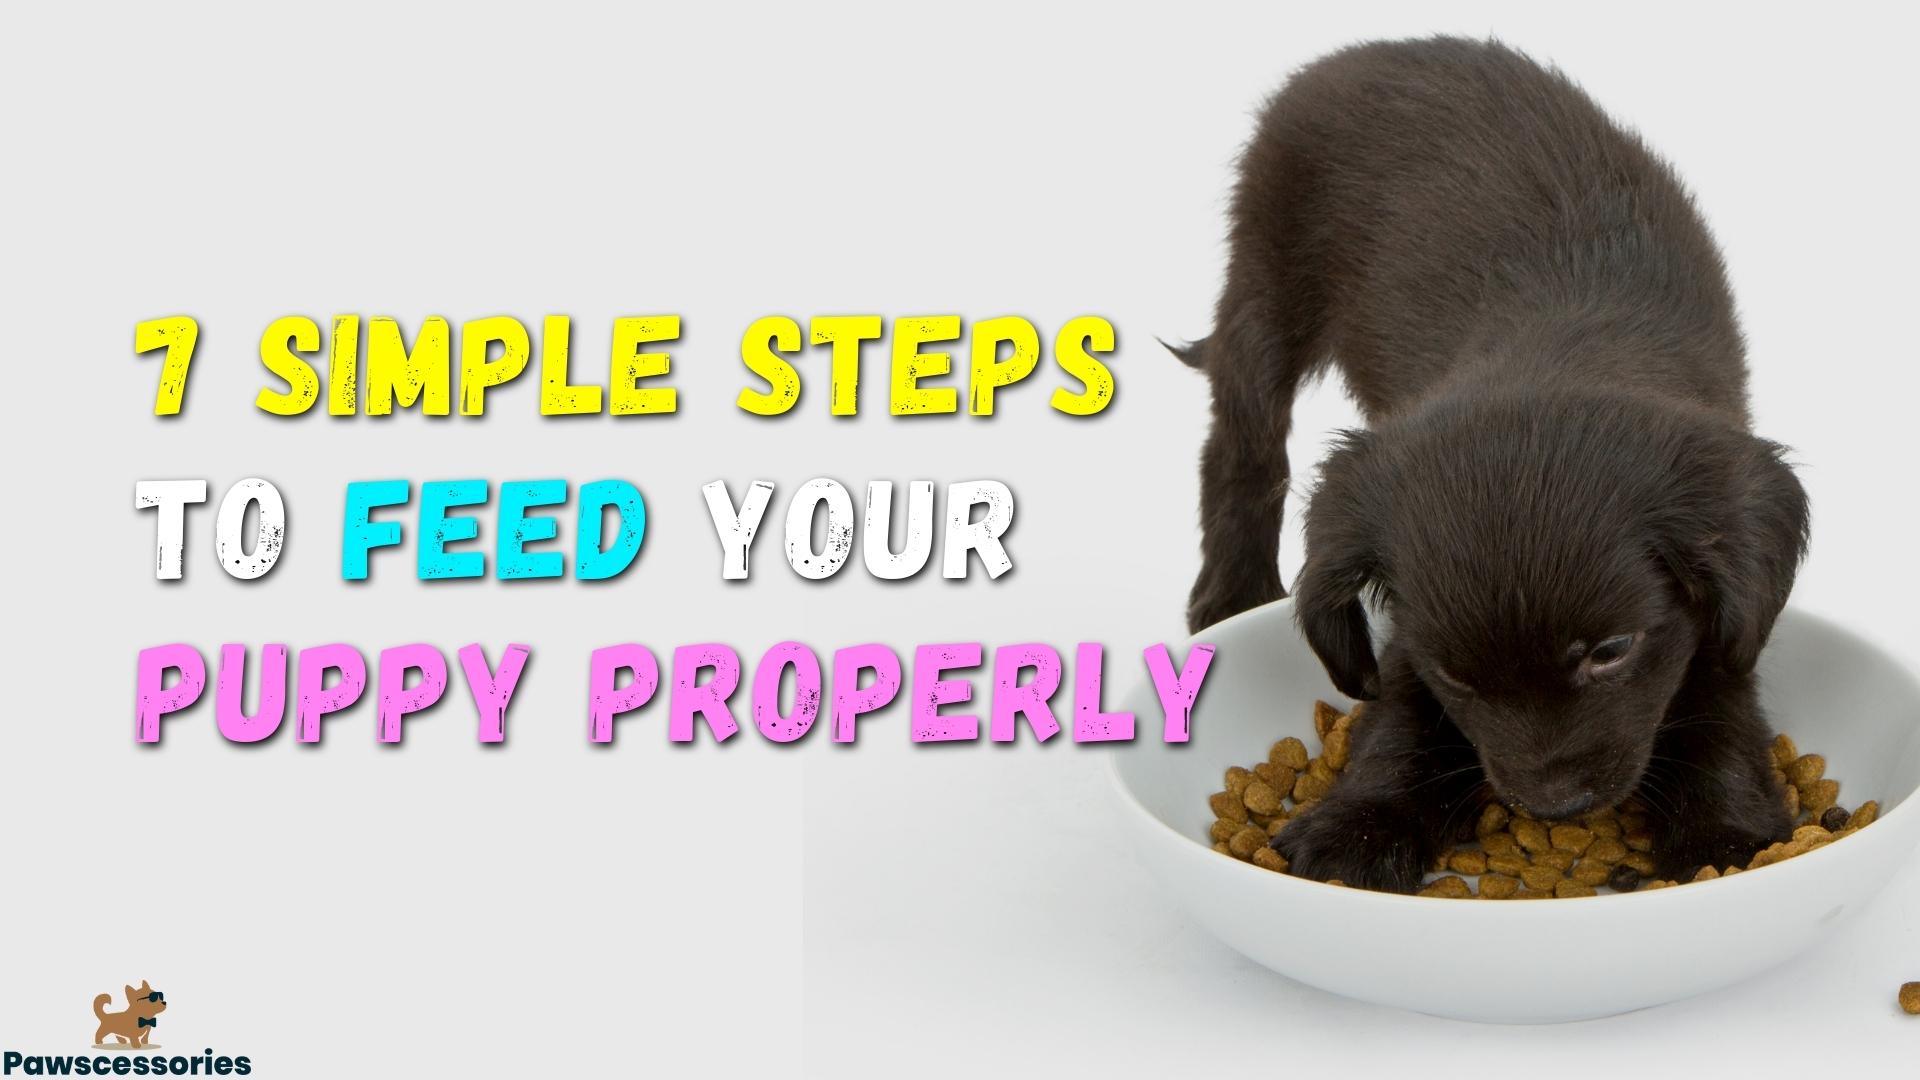 7 Simple Steps To Feeding Your Puppy (#4 Is Crucial)